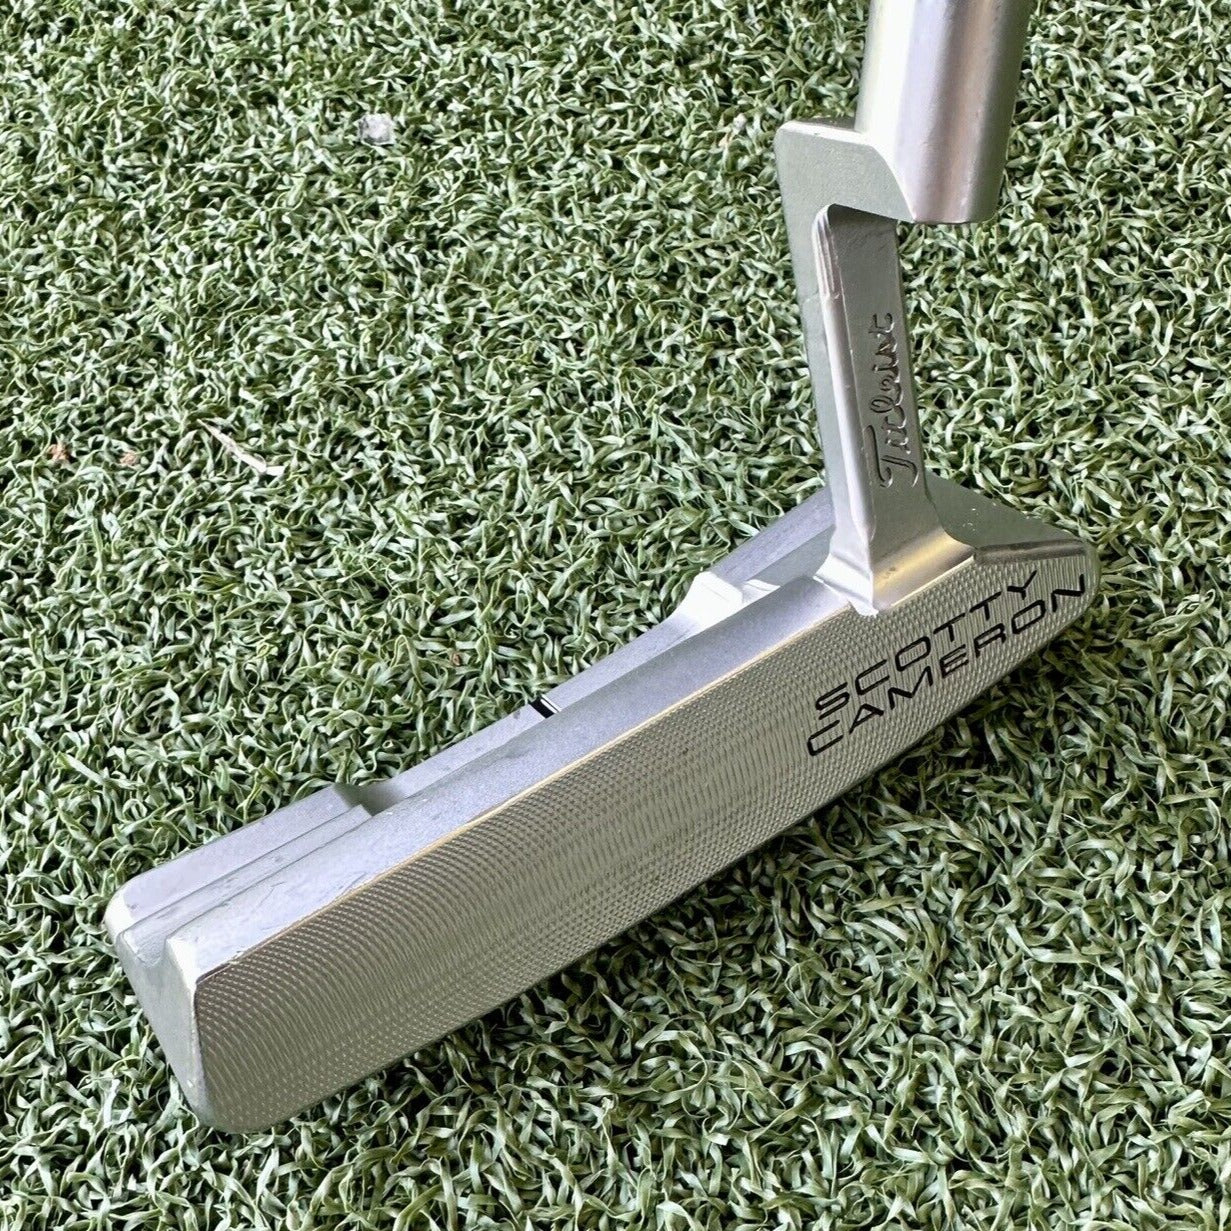 Scotty Cameron Special Select Squareback 2 Putter - Pre Owned Golf 